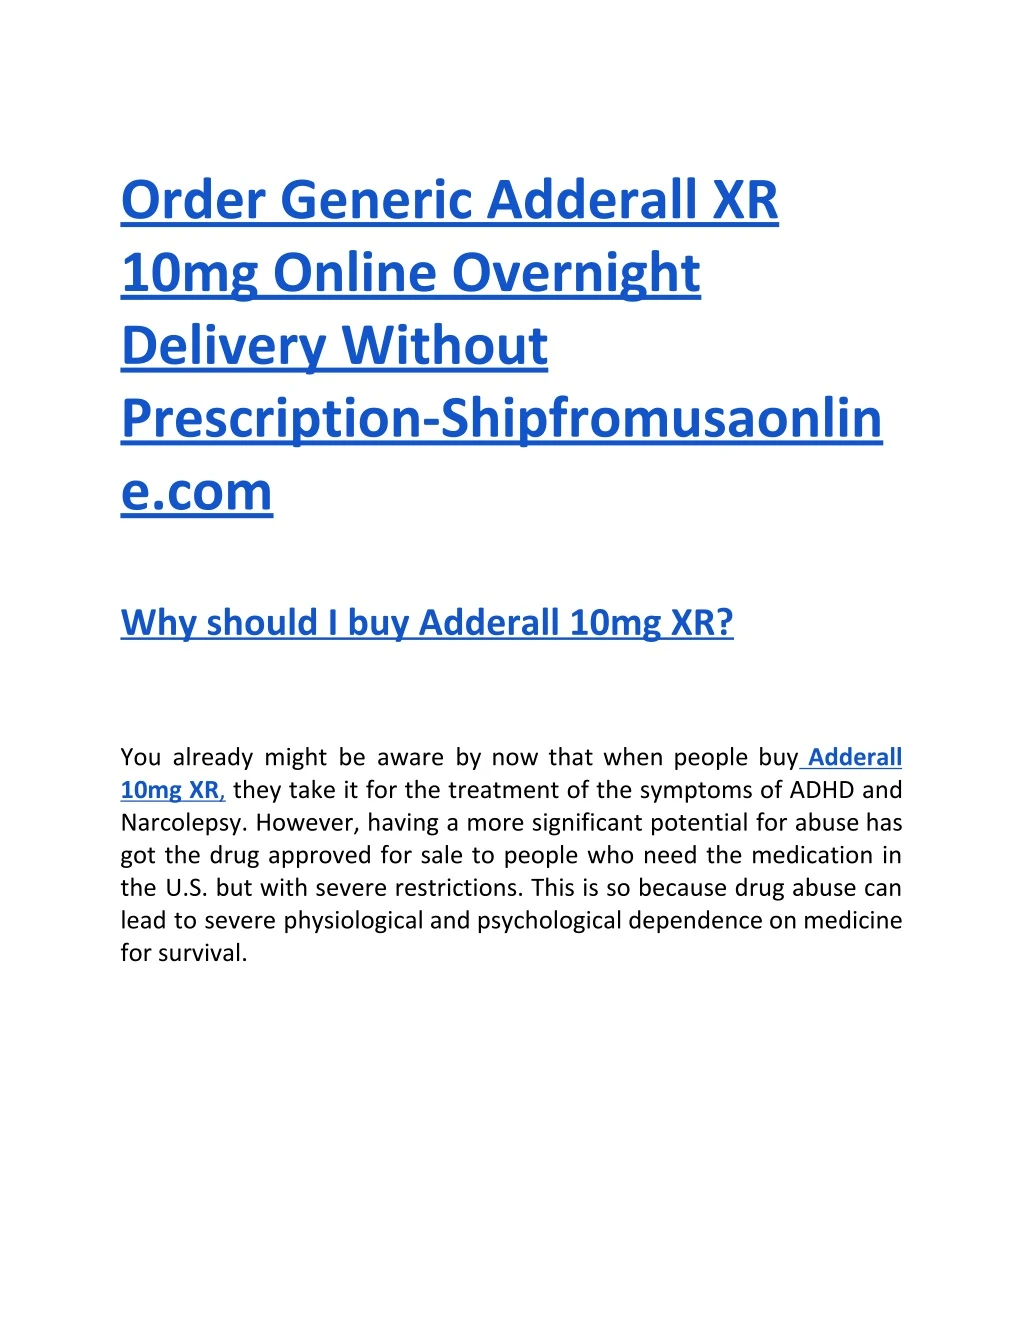 order generic adderall xr 10mg online overnight